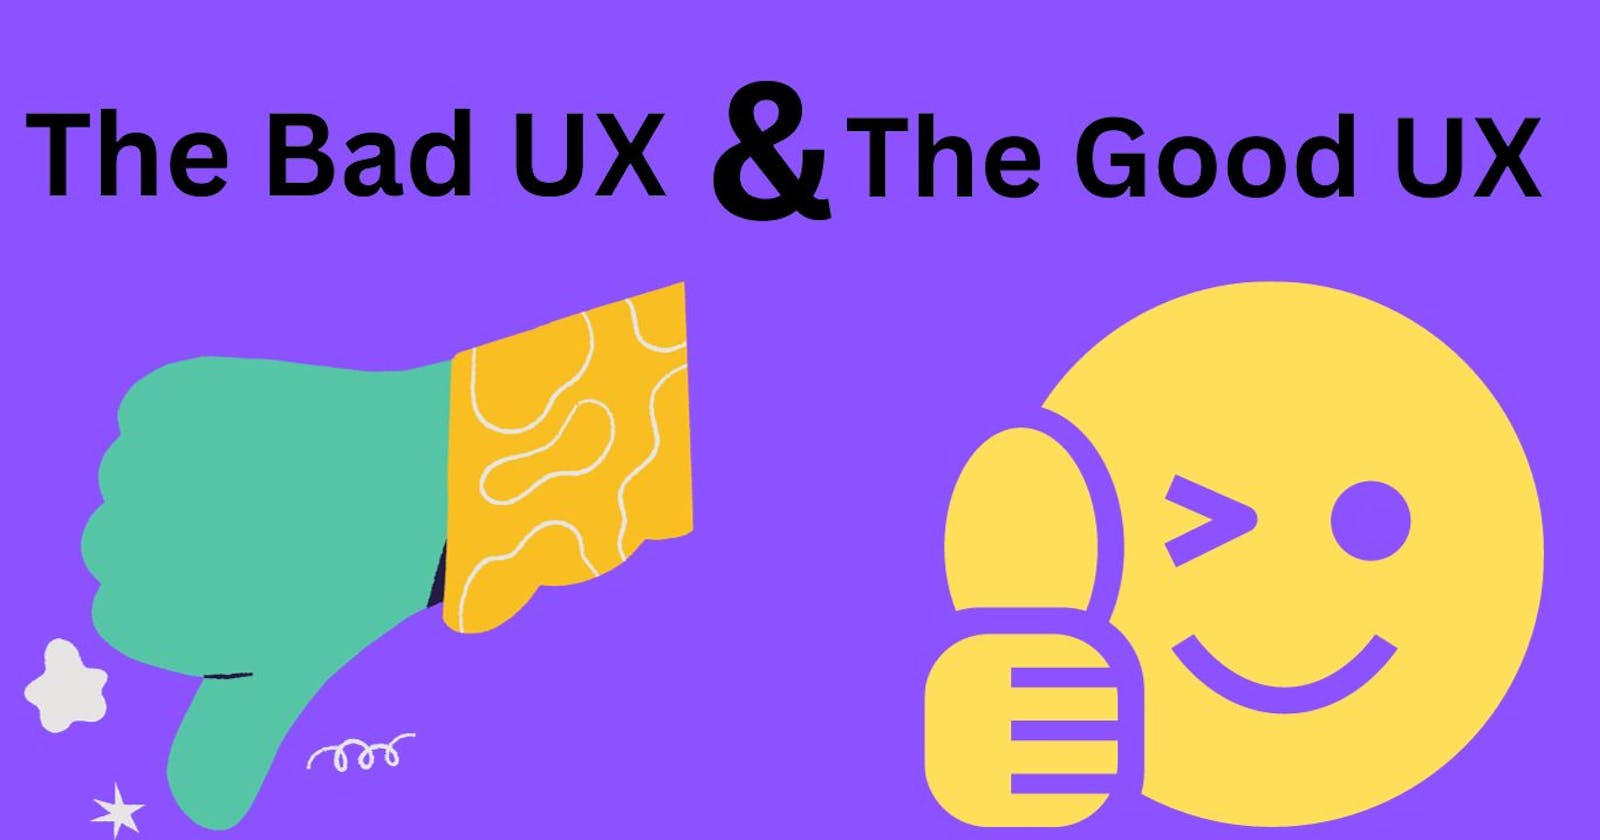 The Art of UX Design: A Tale of Good and Bad Experiences